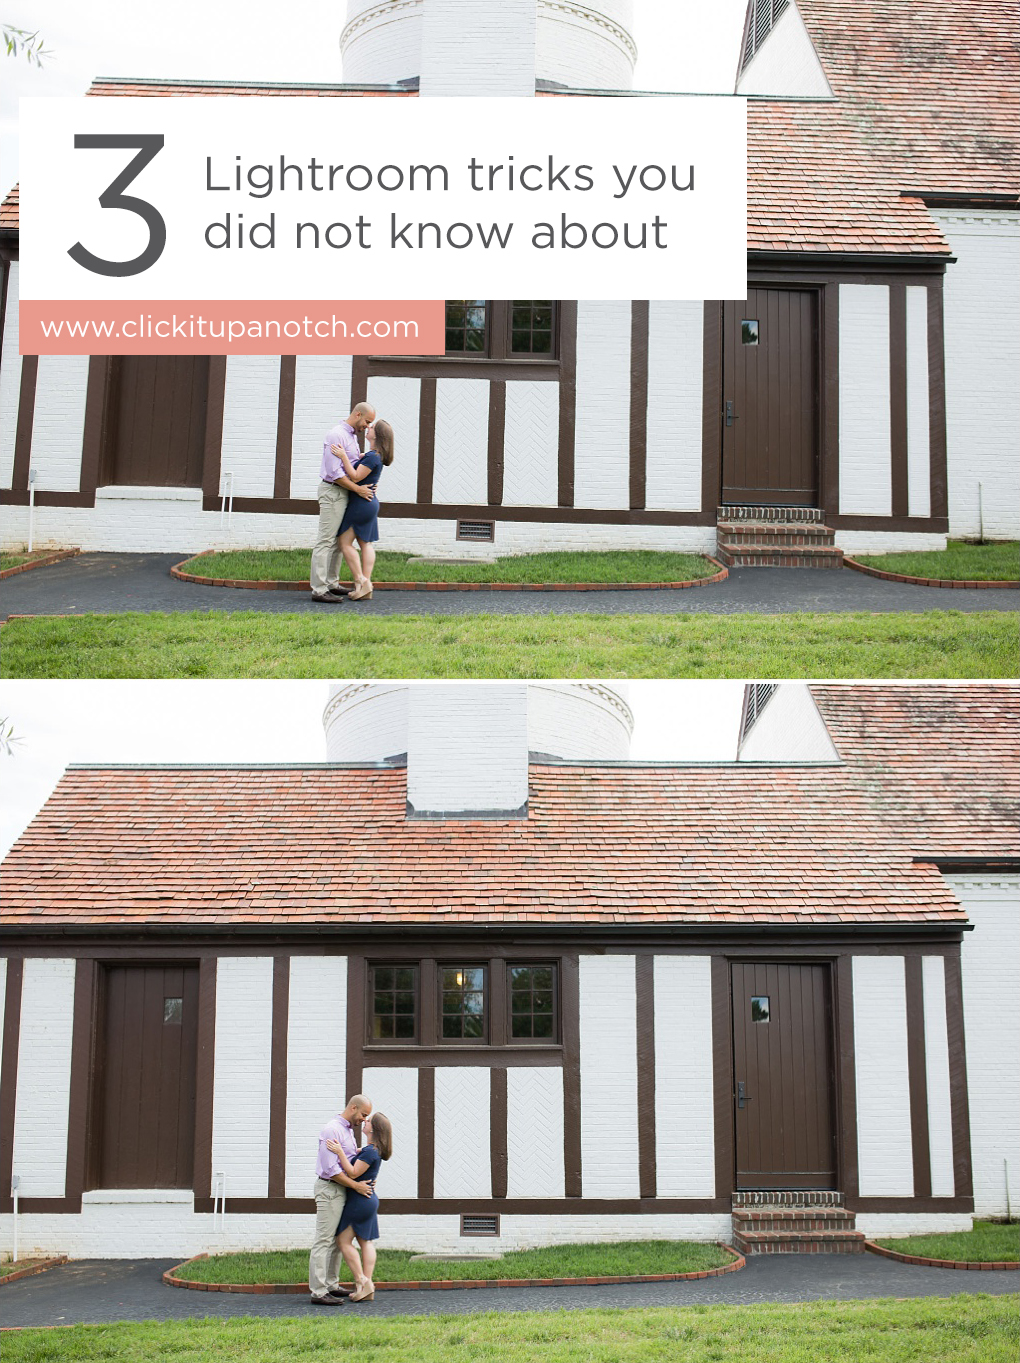 I have been using Lightroom for years and did not know about one of these tricks. - 3 Lightroom Tricks You Did Not Know About